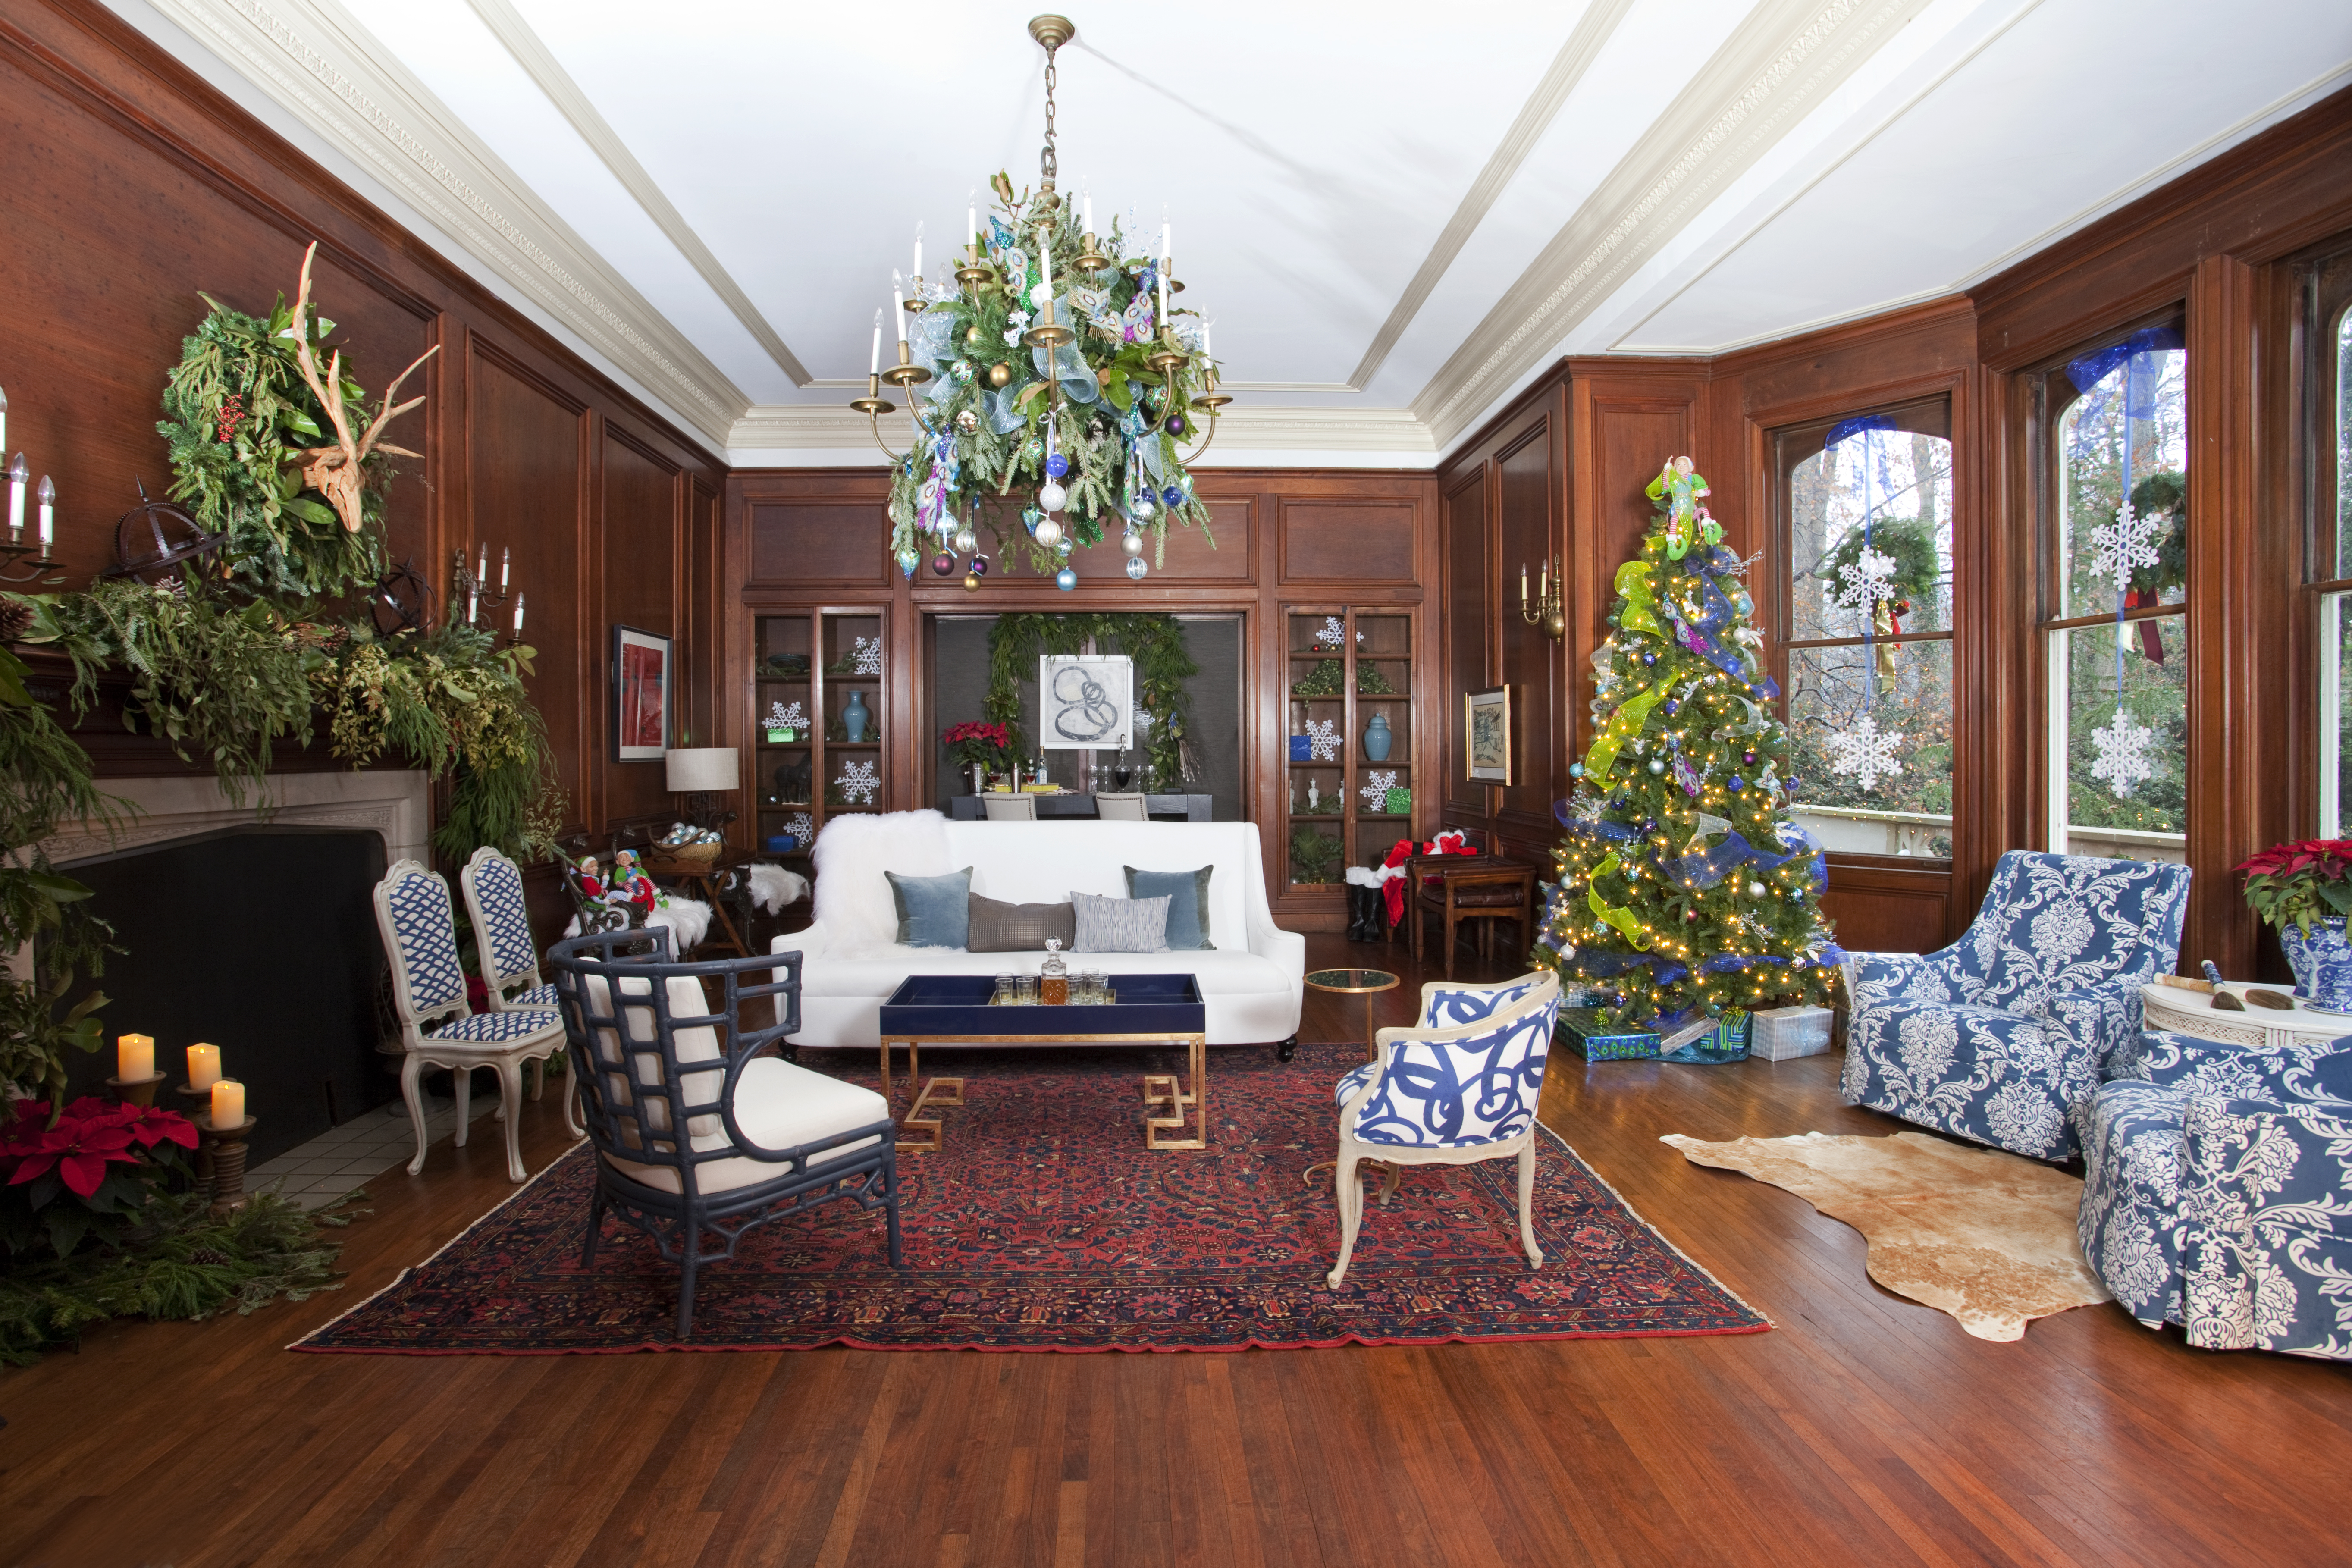 HOLIDAY DECORATING: 5 DESIGN TIPS FOR YOUR MANTEL-Rooms Revamped Interior Design